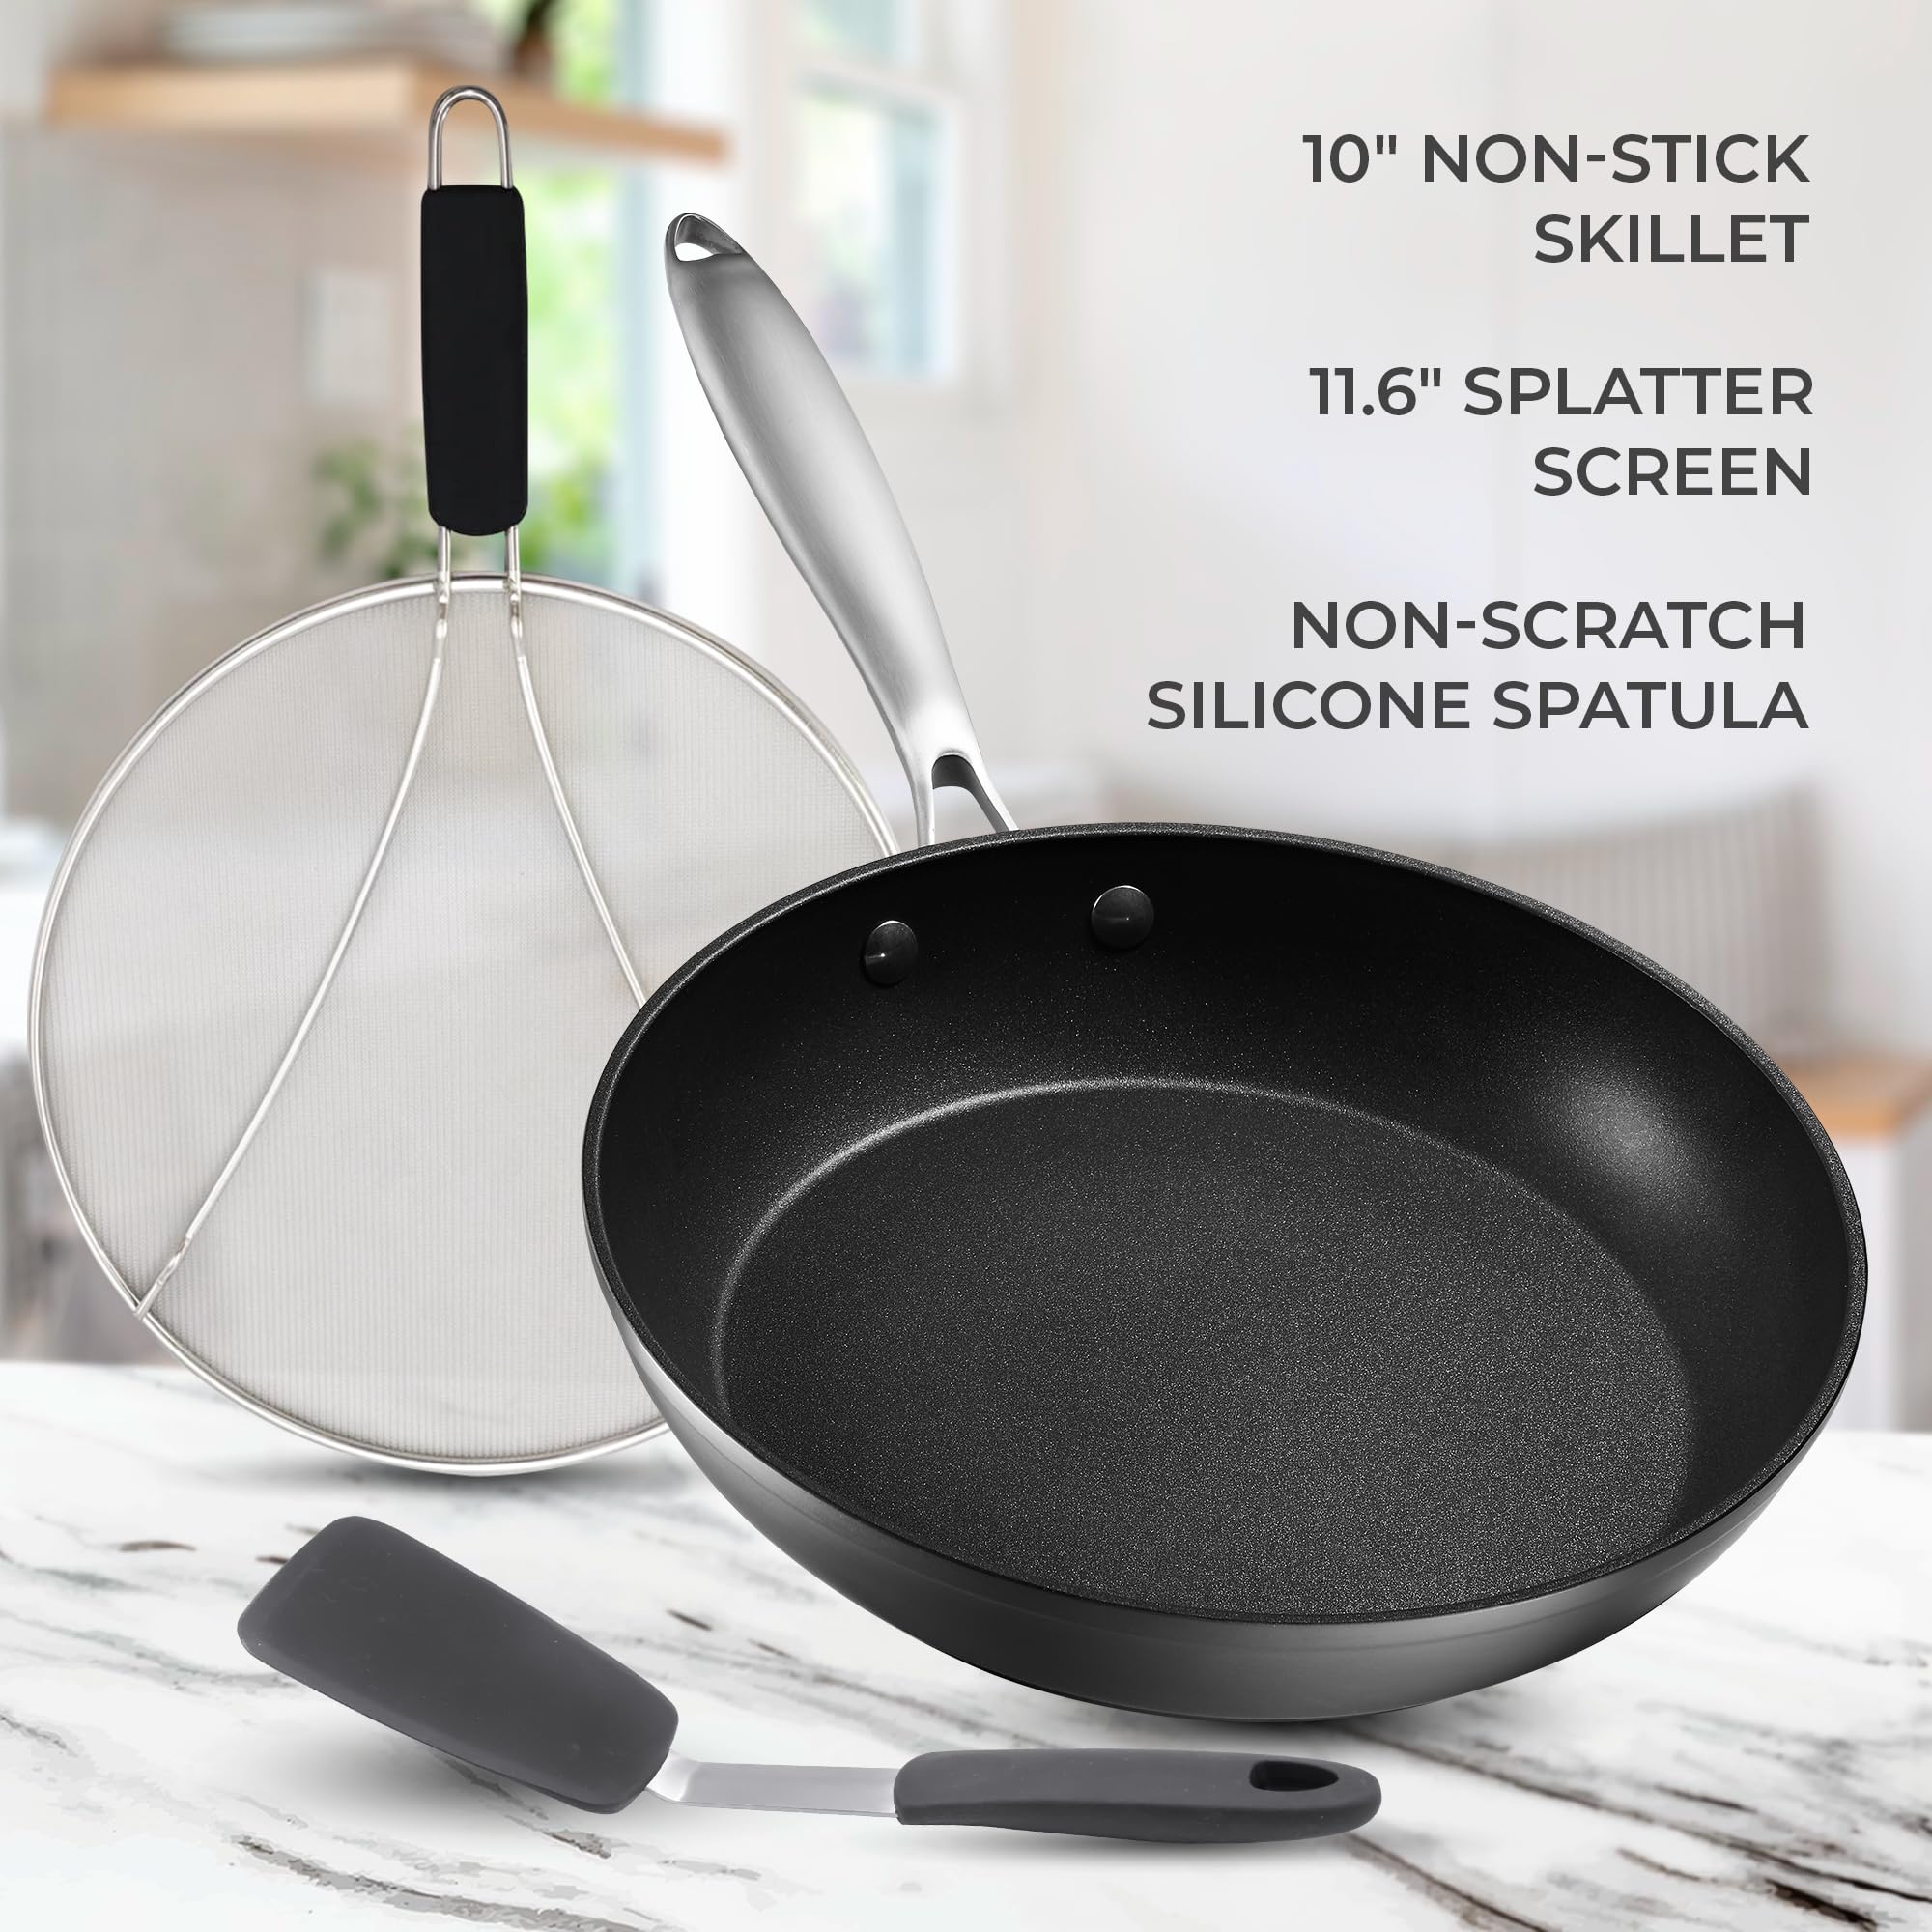 Belwares Nonstick Frying Pan - 10 Inch Non Stick Skillet Egg Frying Pan – Lightweight Aluminum Hard-Anodized Fry Pan for Kitchen Cooking with Gas, Electric, Oven or Induction  - Like New